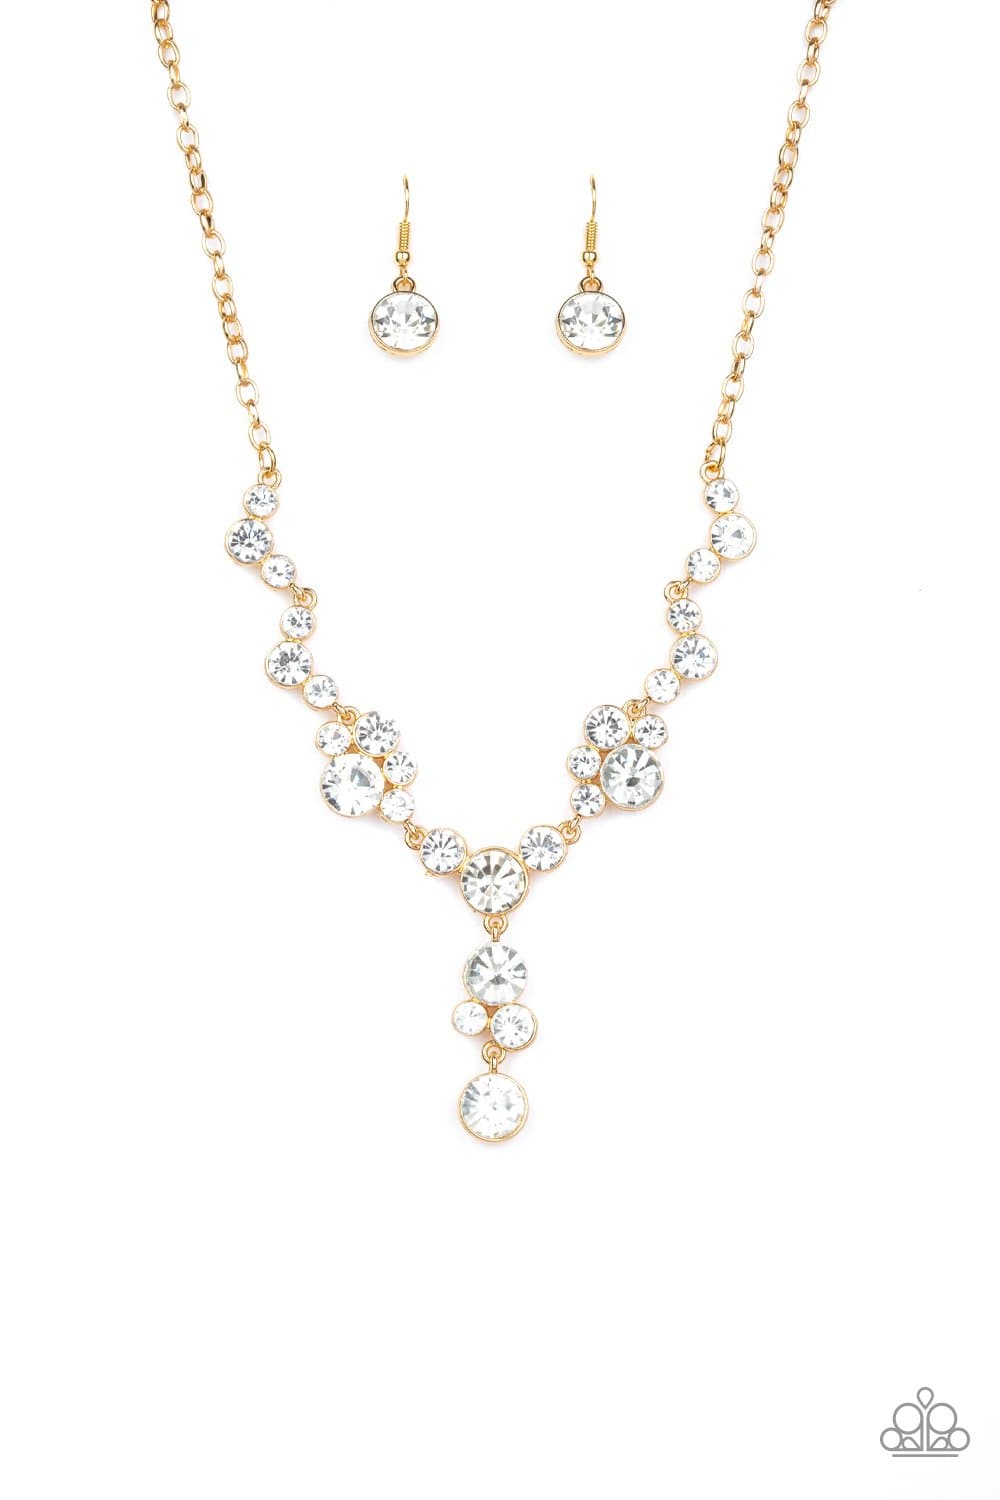 A292 - Inner Light Gold Necklace by Paparazzi Accessories on Fancy5Fashion.com